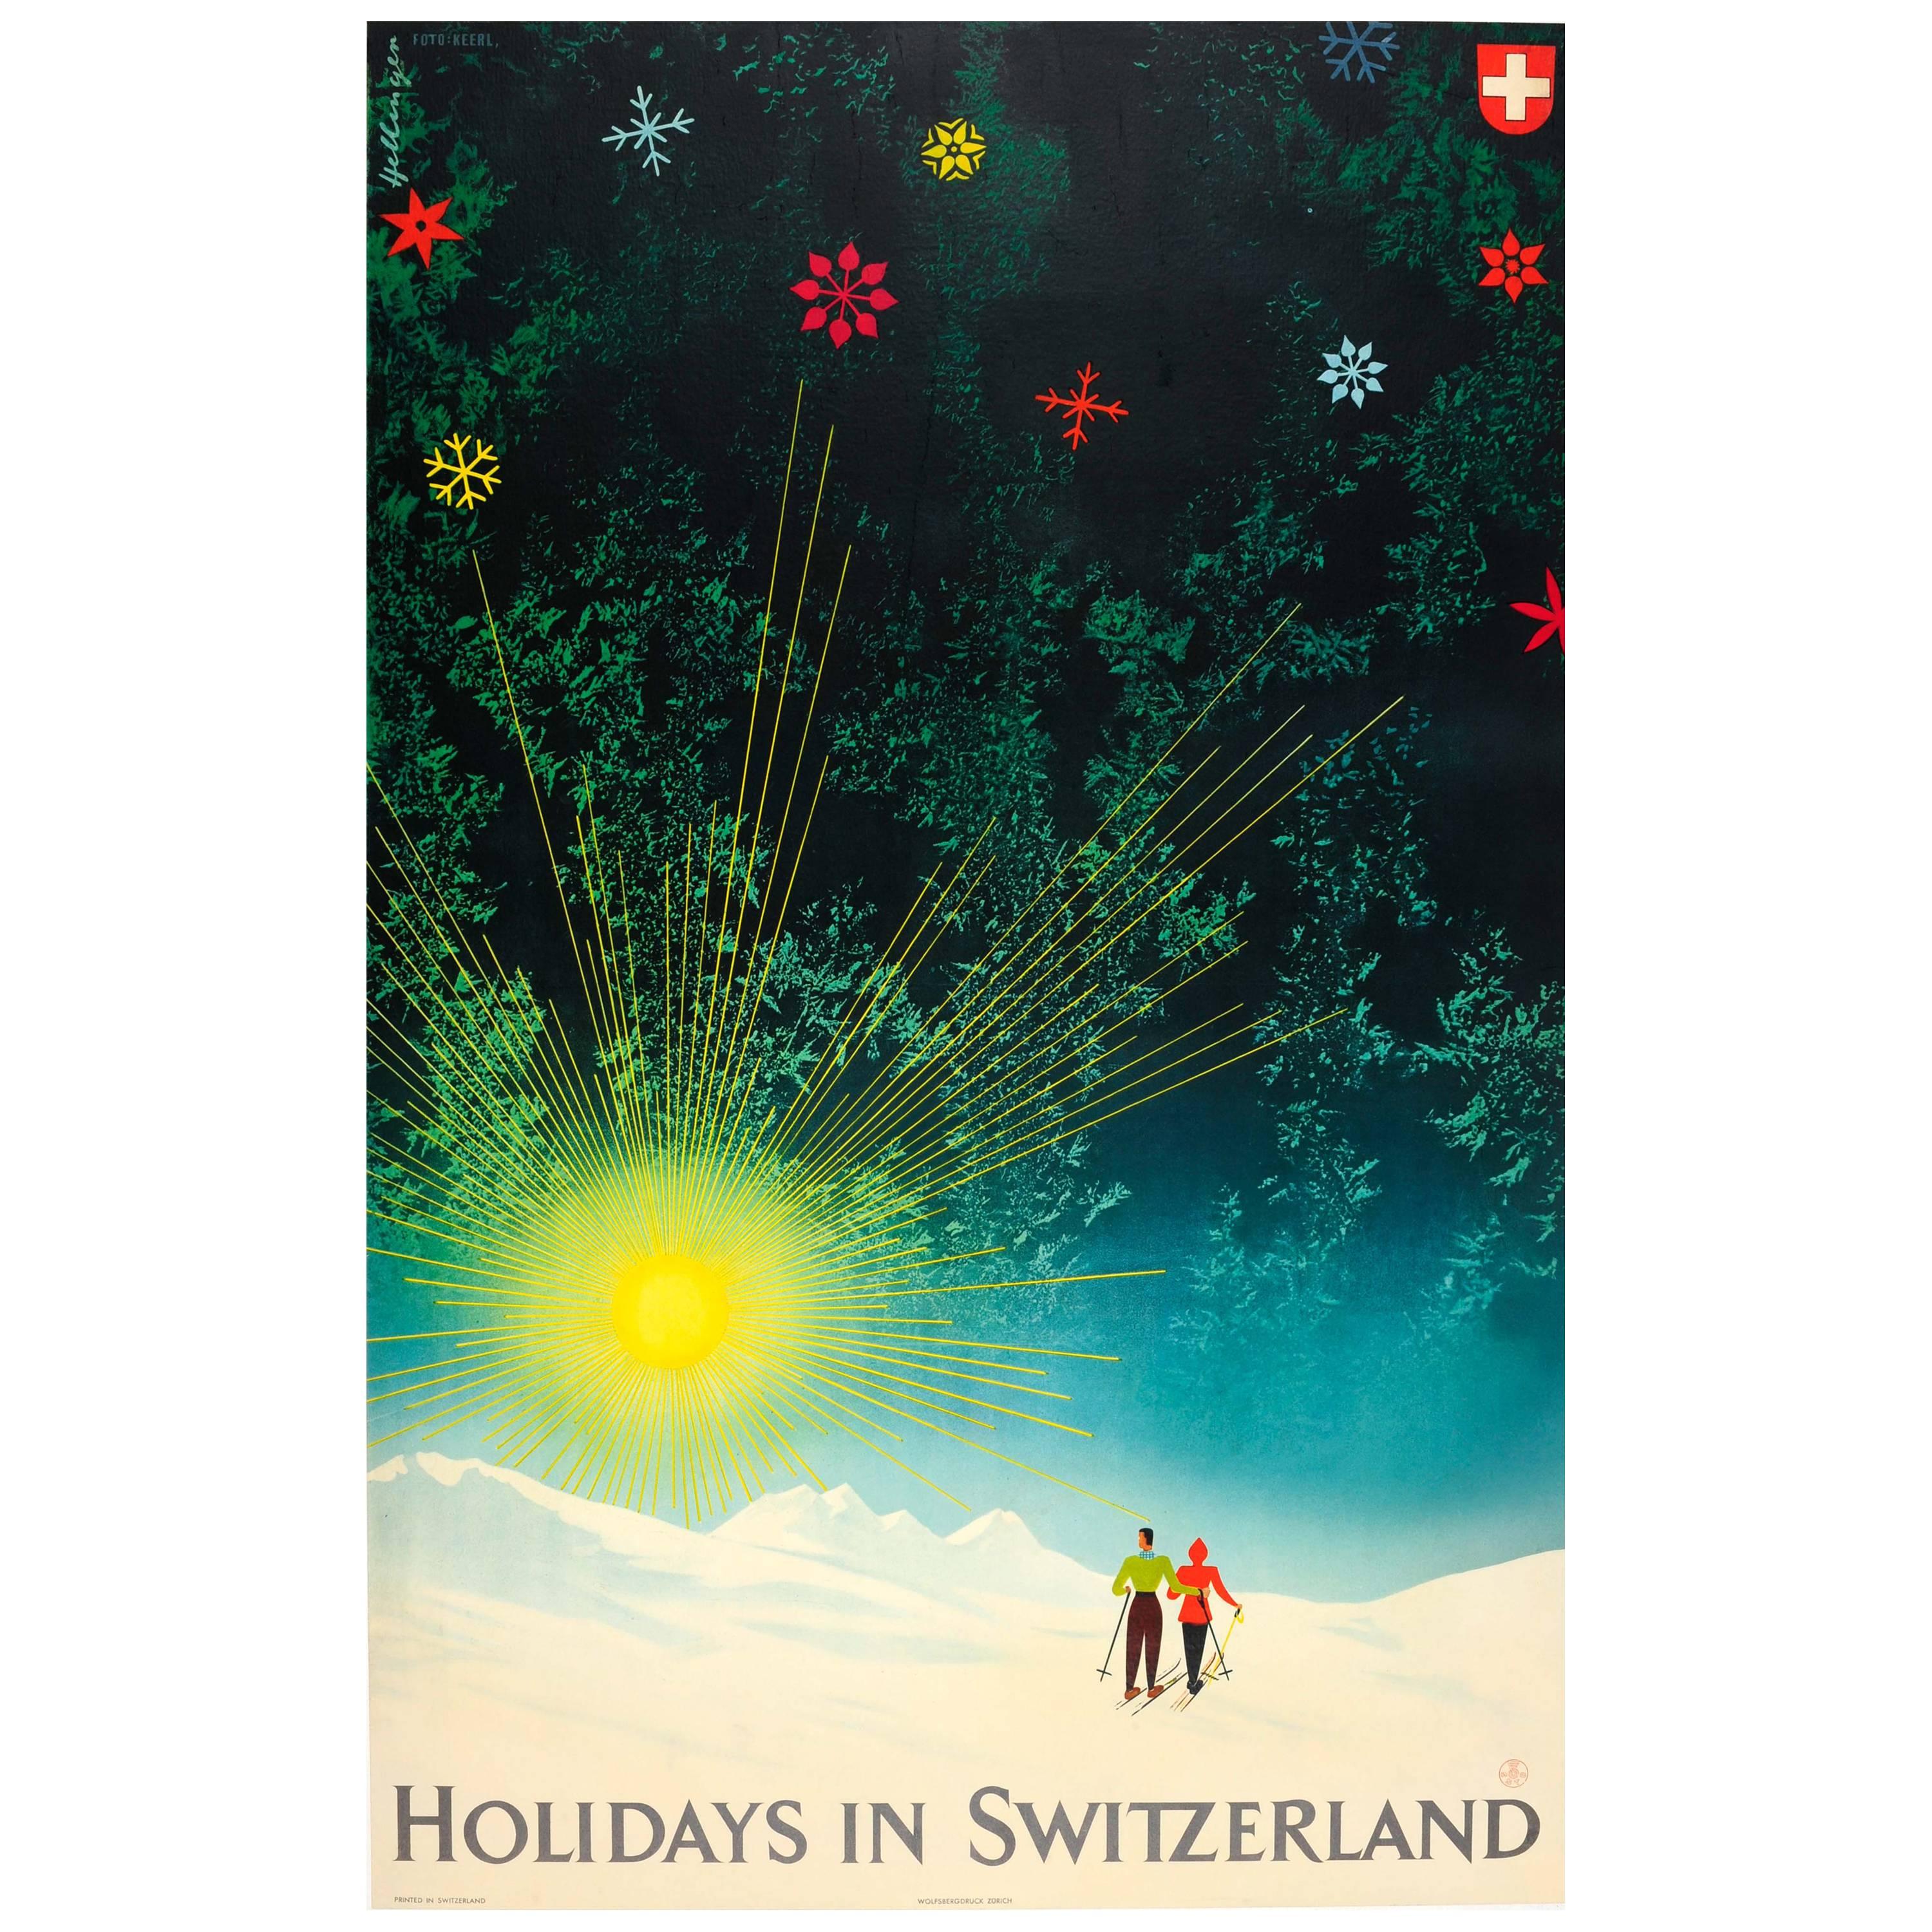 Original Vintage Skiing and Winter Sport Travel Poster - Holidays In Switzerland